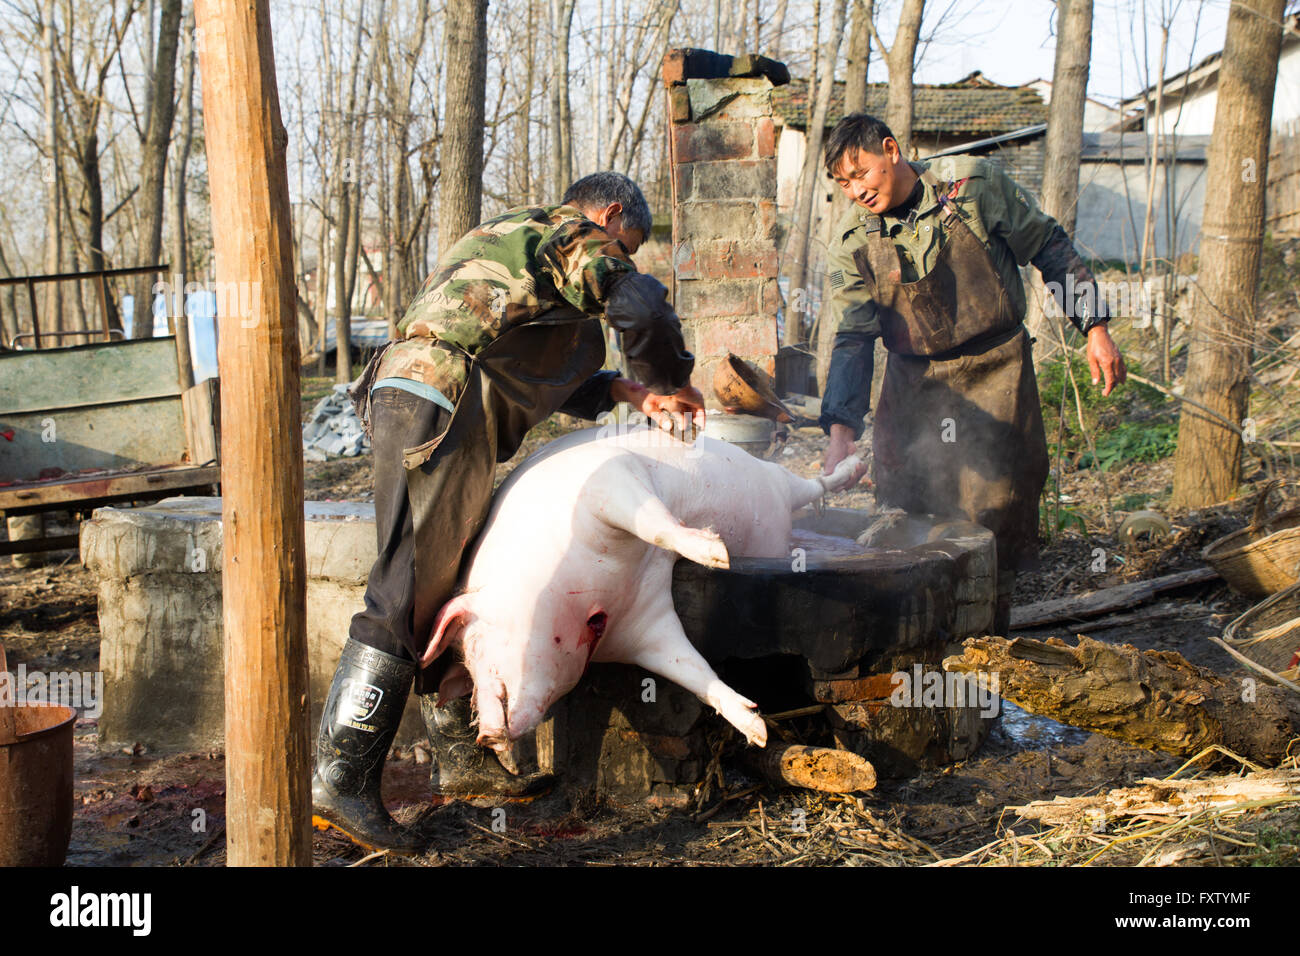 2 men slaughtering a pig and cutting it up in rural china Stock Photo